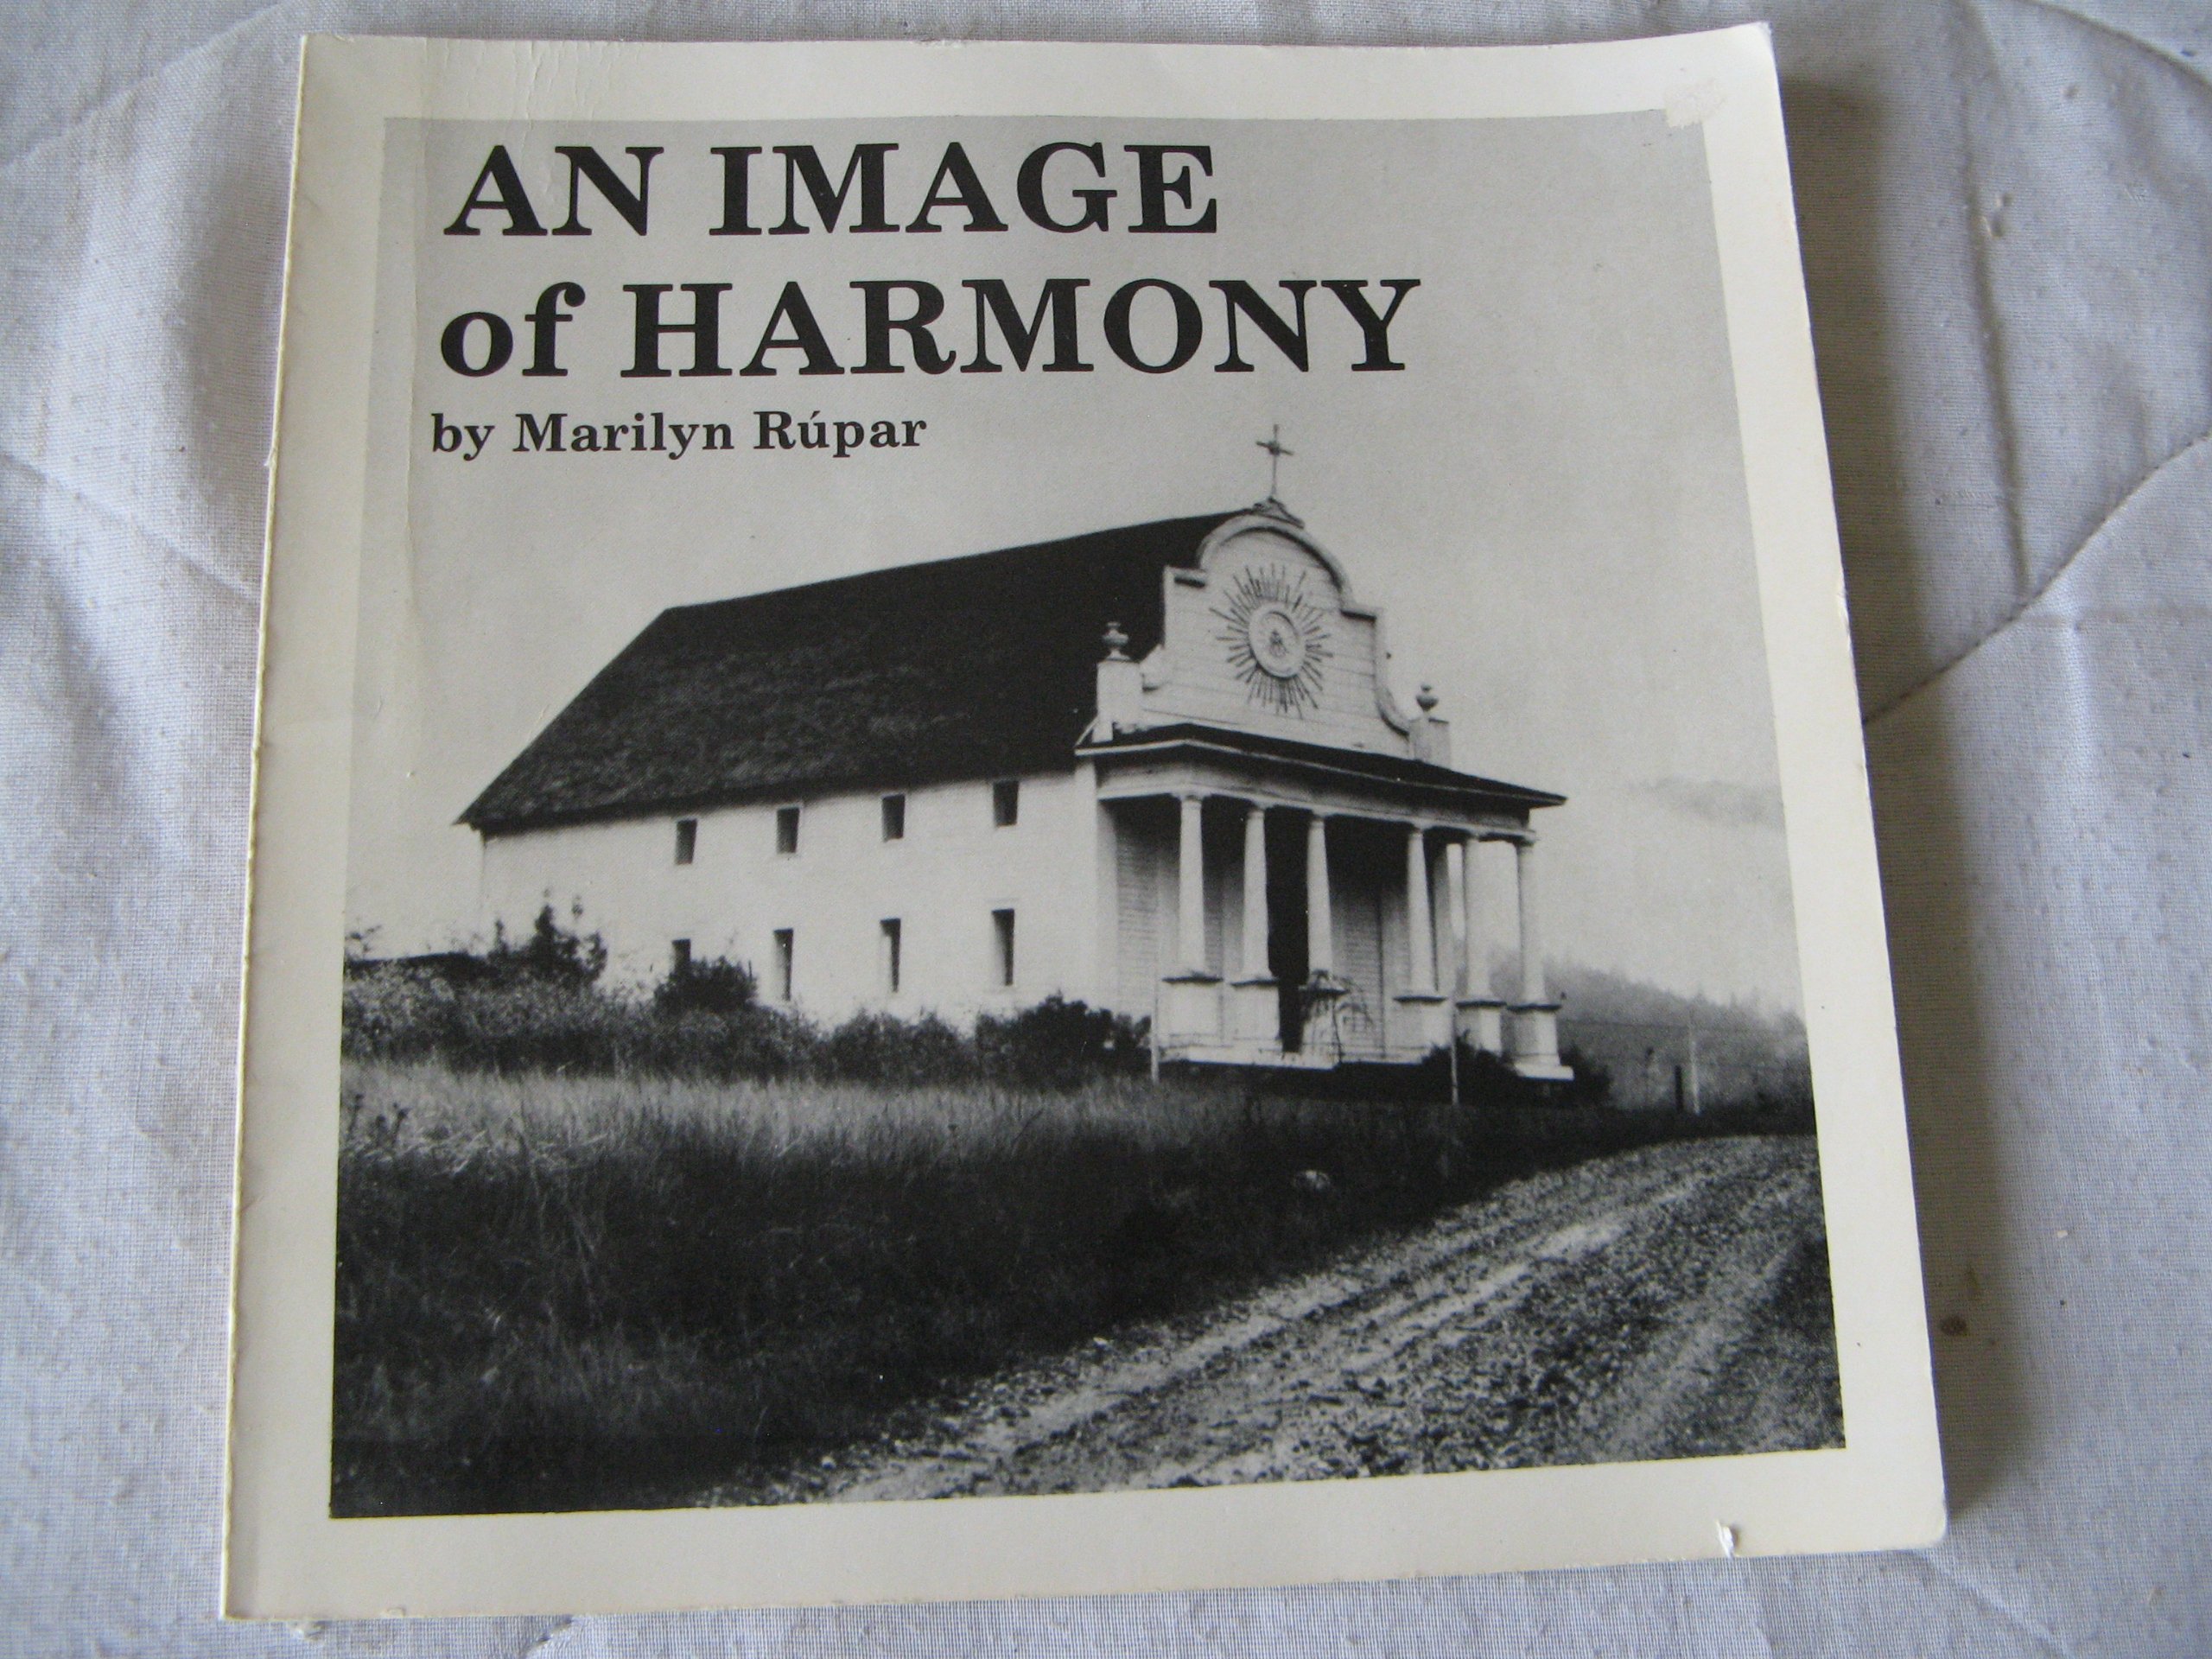 An image of harmony (book cover)